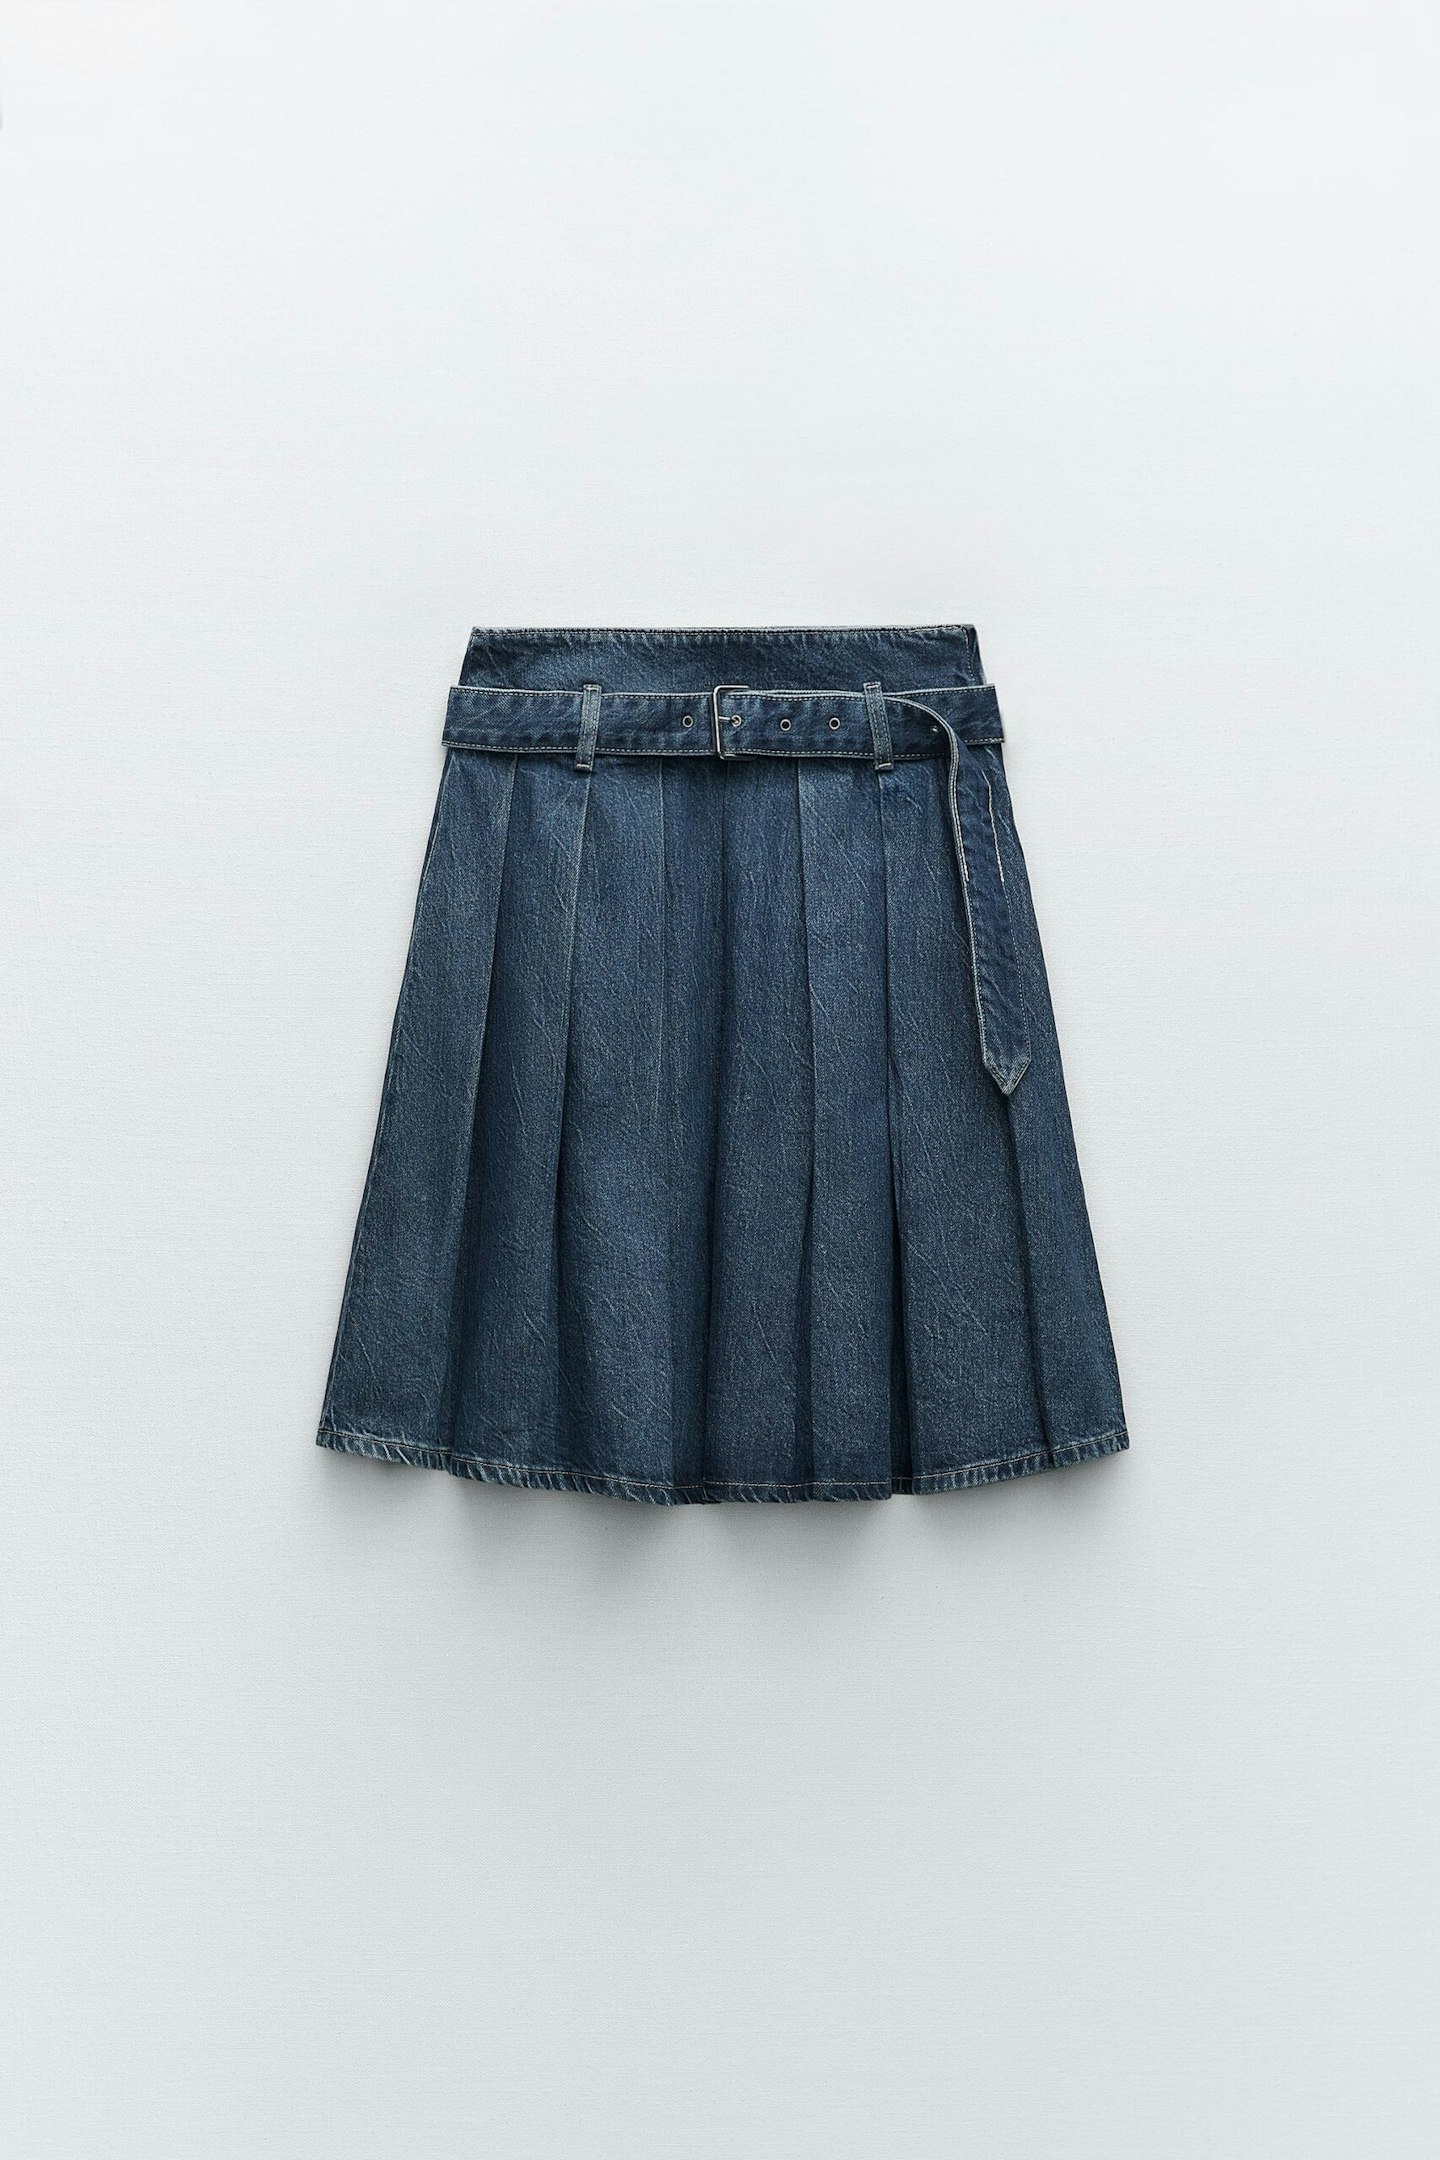 The Pleated Skirts You Probably Wore In 2008 Are Back